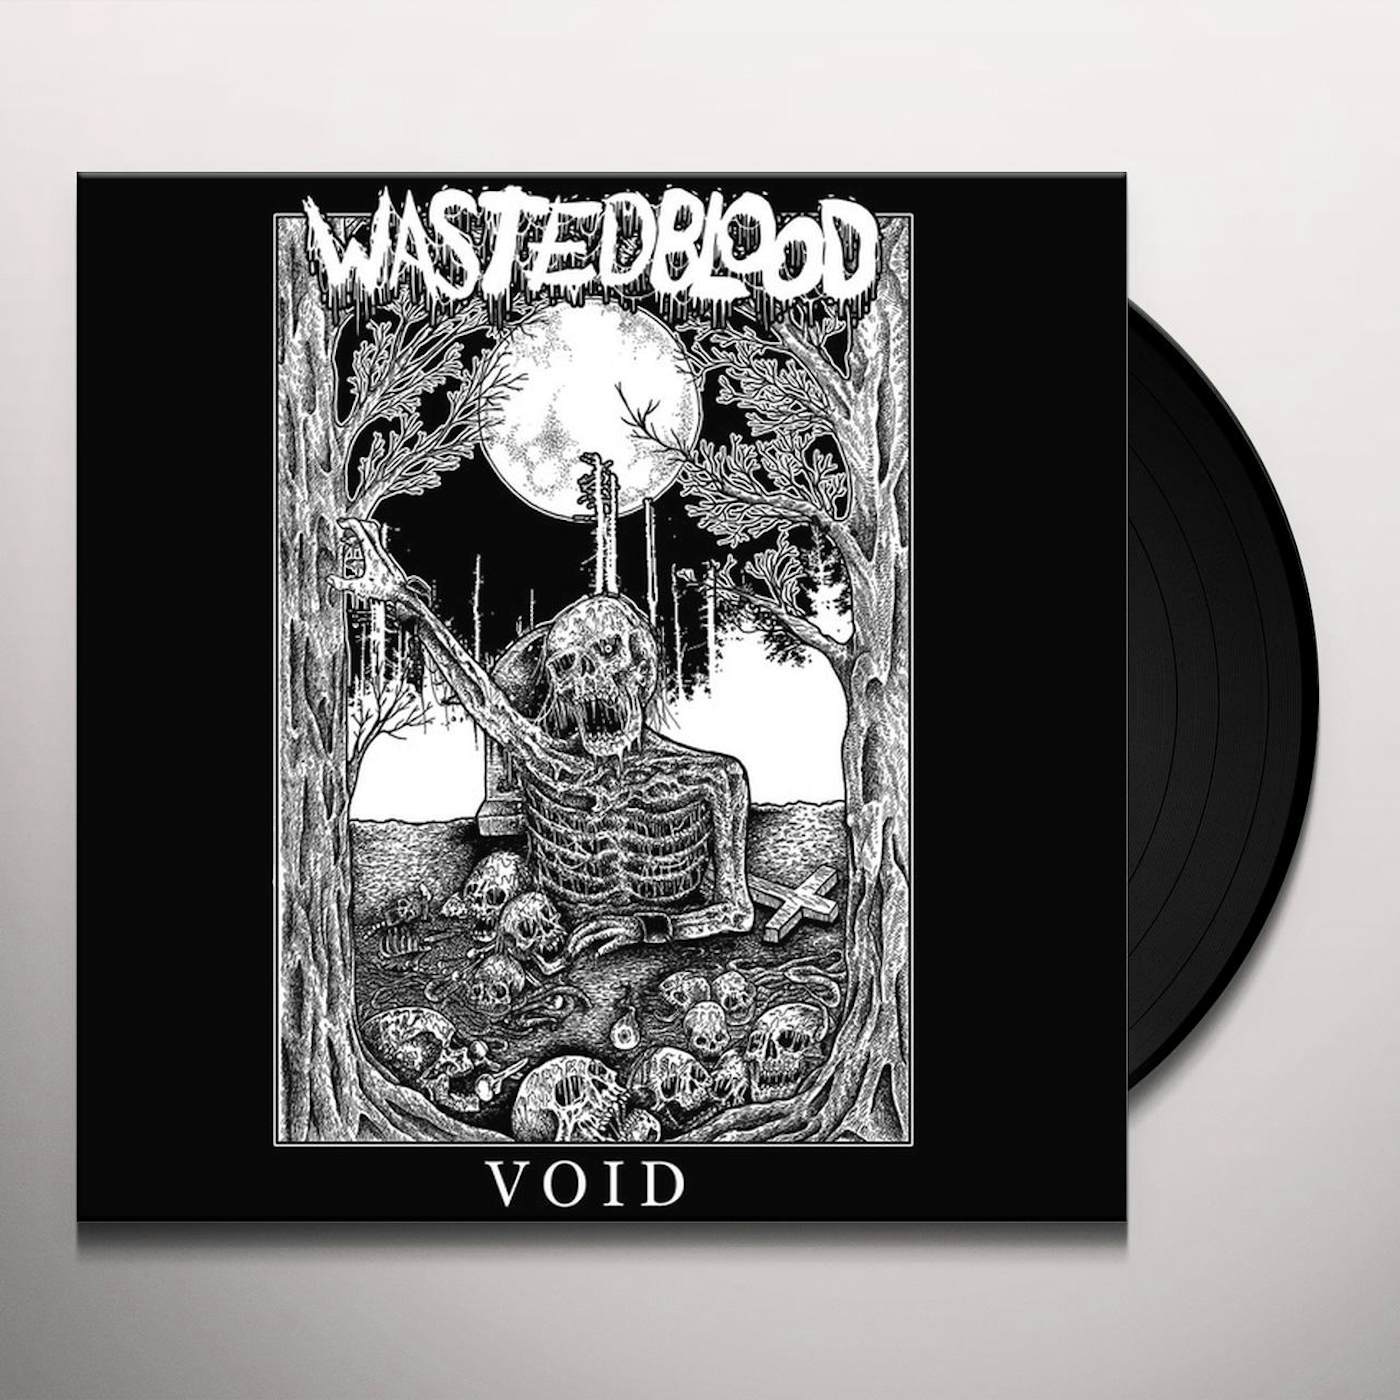 Wasted Blood Void Vinyl Record